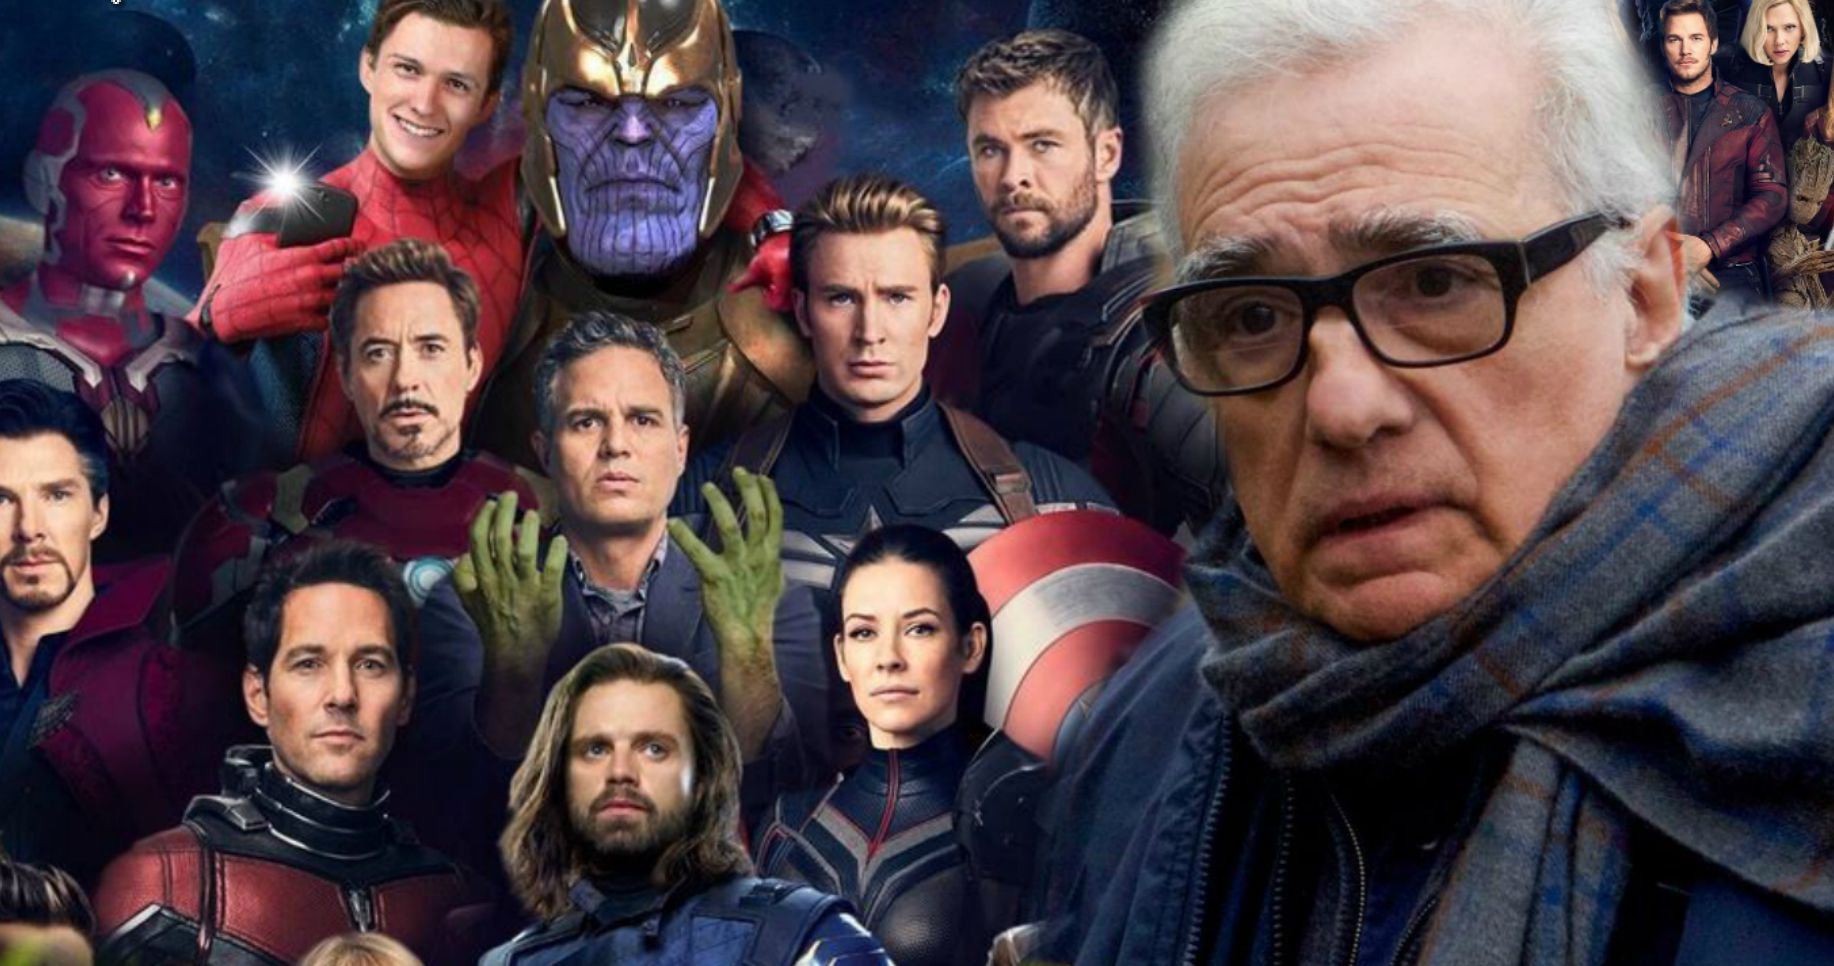 Scorsese Treads Back on Anti-Marvel Comments, Warns Against Sound Bites